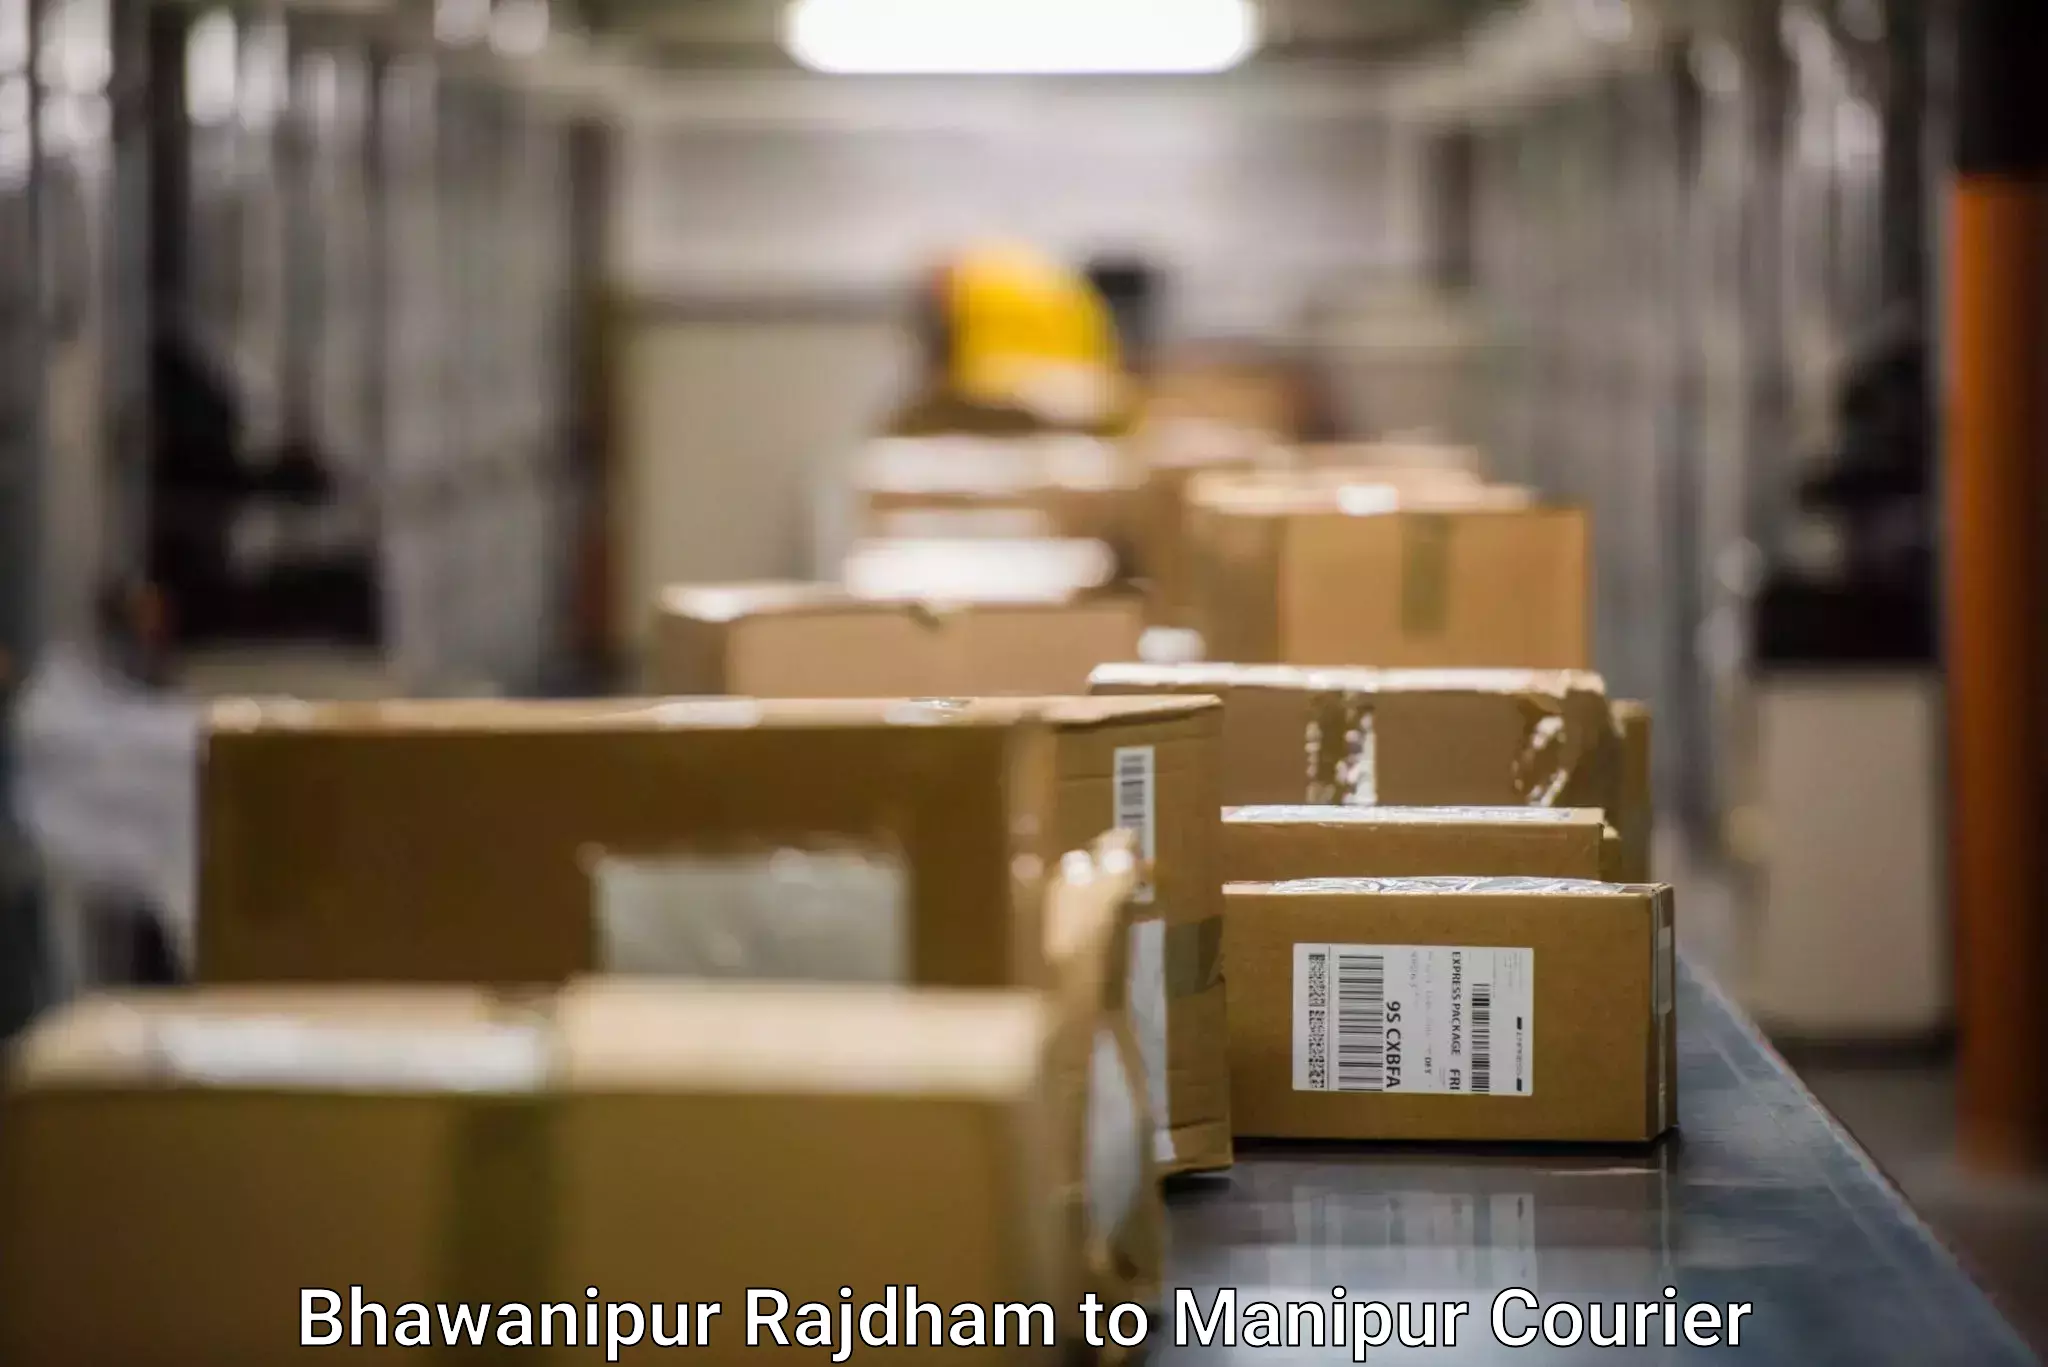 Special handling courier Bhawanipur Rajdham to Imphal